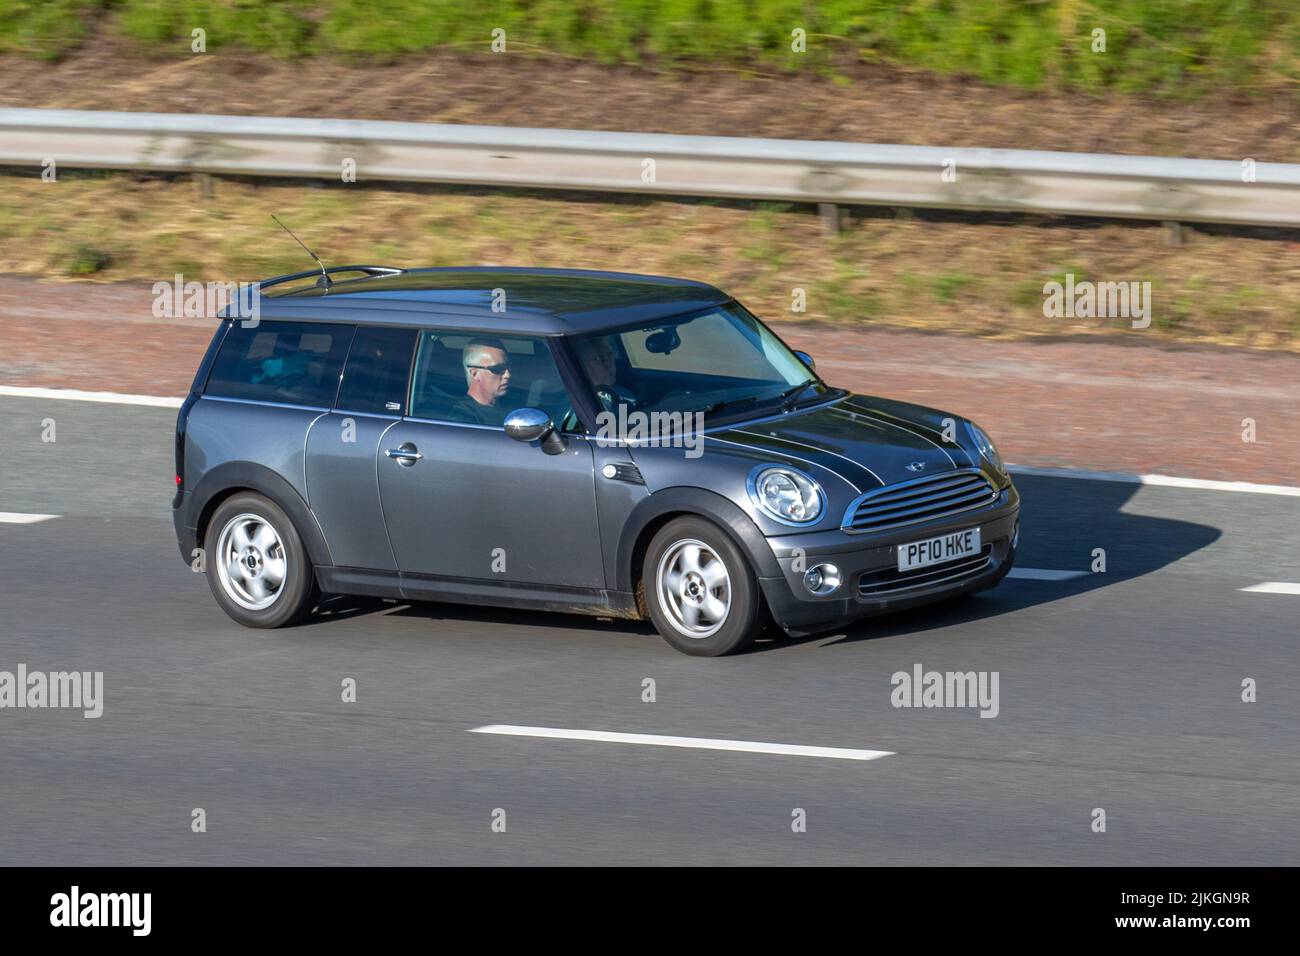 2010 Mini One Graphite Clubman, Estate Petrol 1598 cc sport utility vehicle, travelling on the M6 Motorway, Manchester, UK Stock Photo